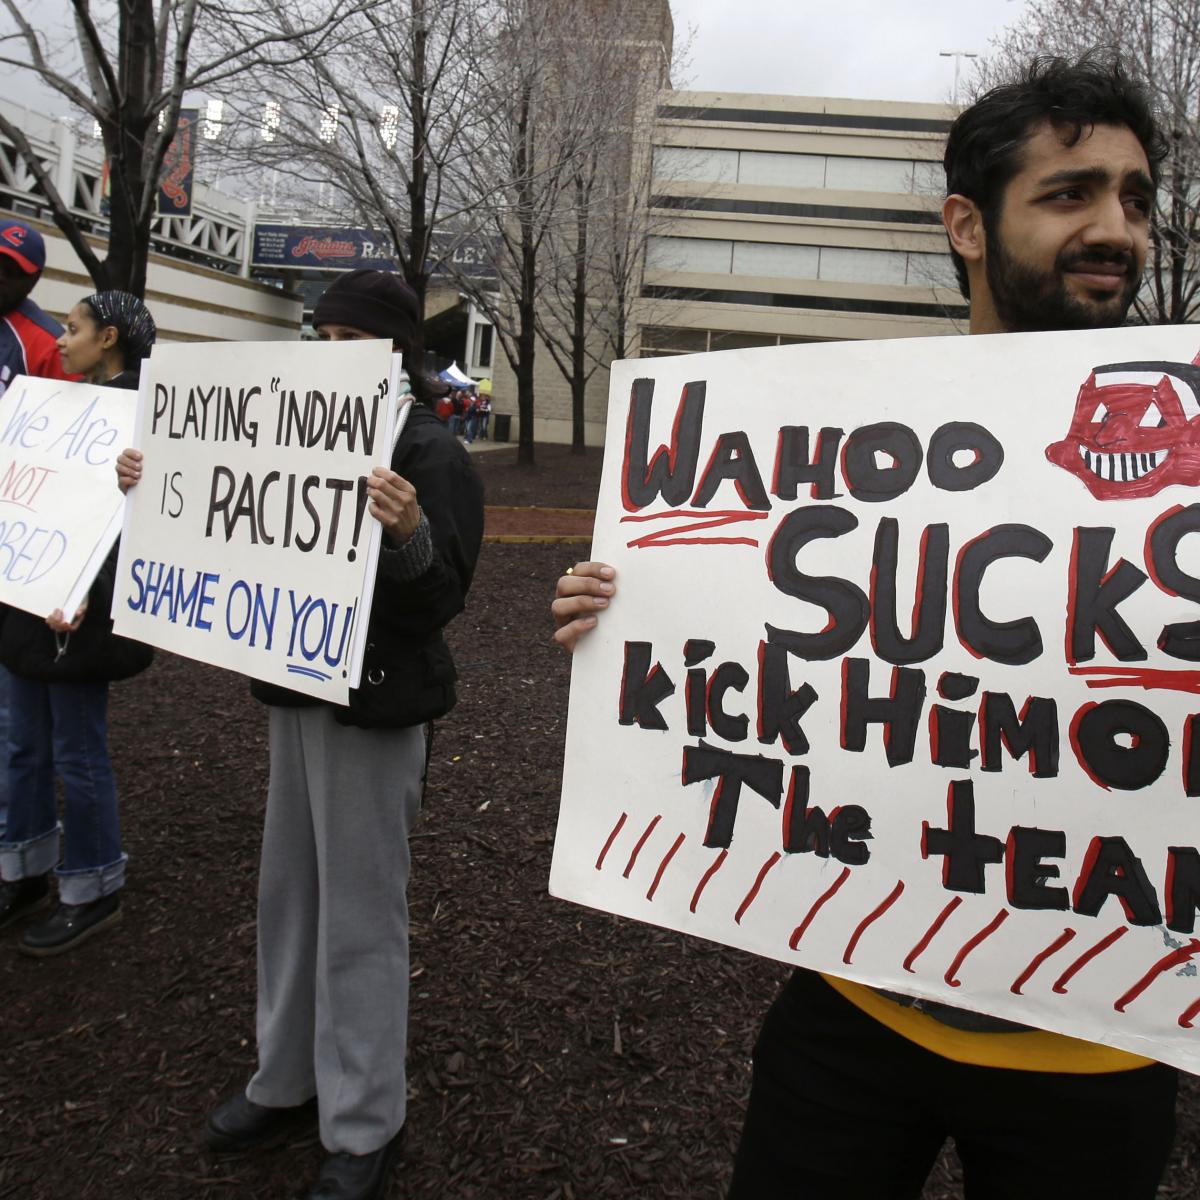 Robert Roche battles Chief Wahoo, the Cleveland Indians and